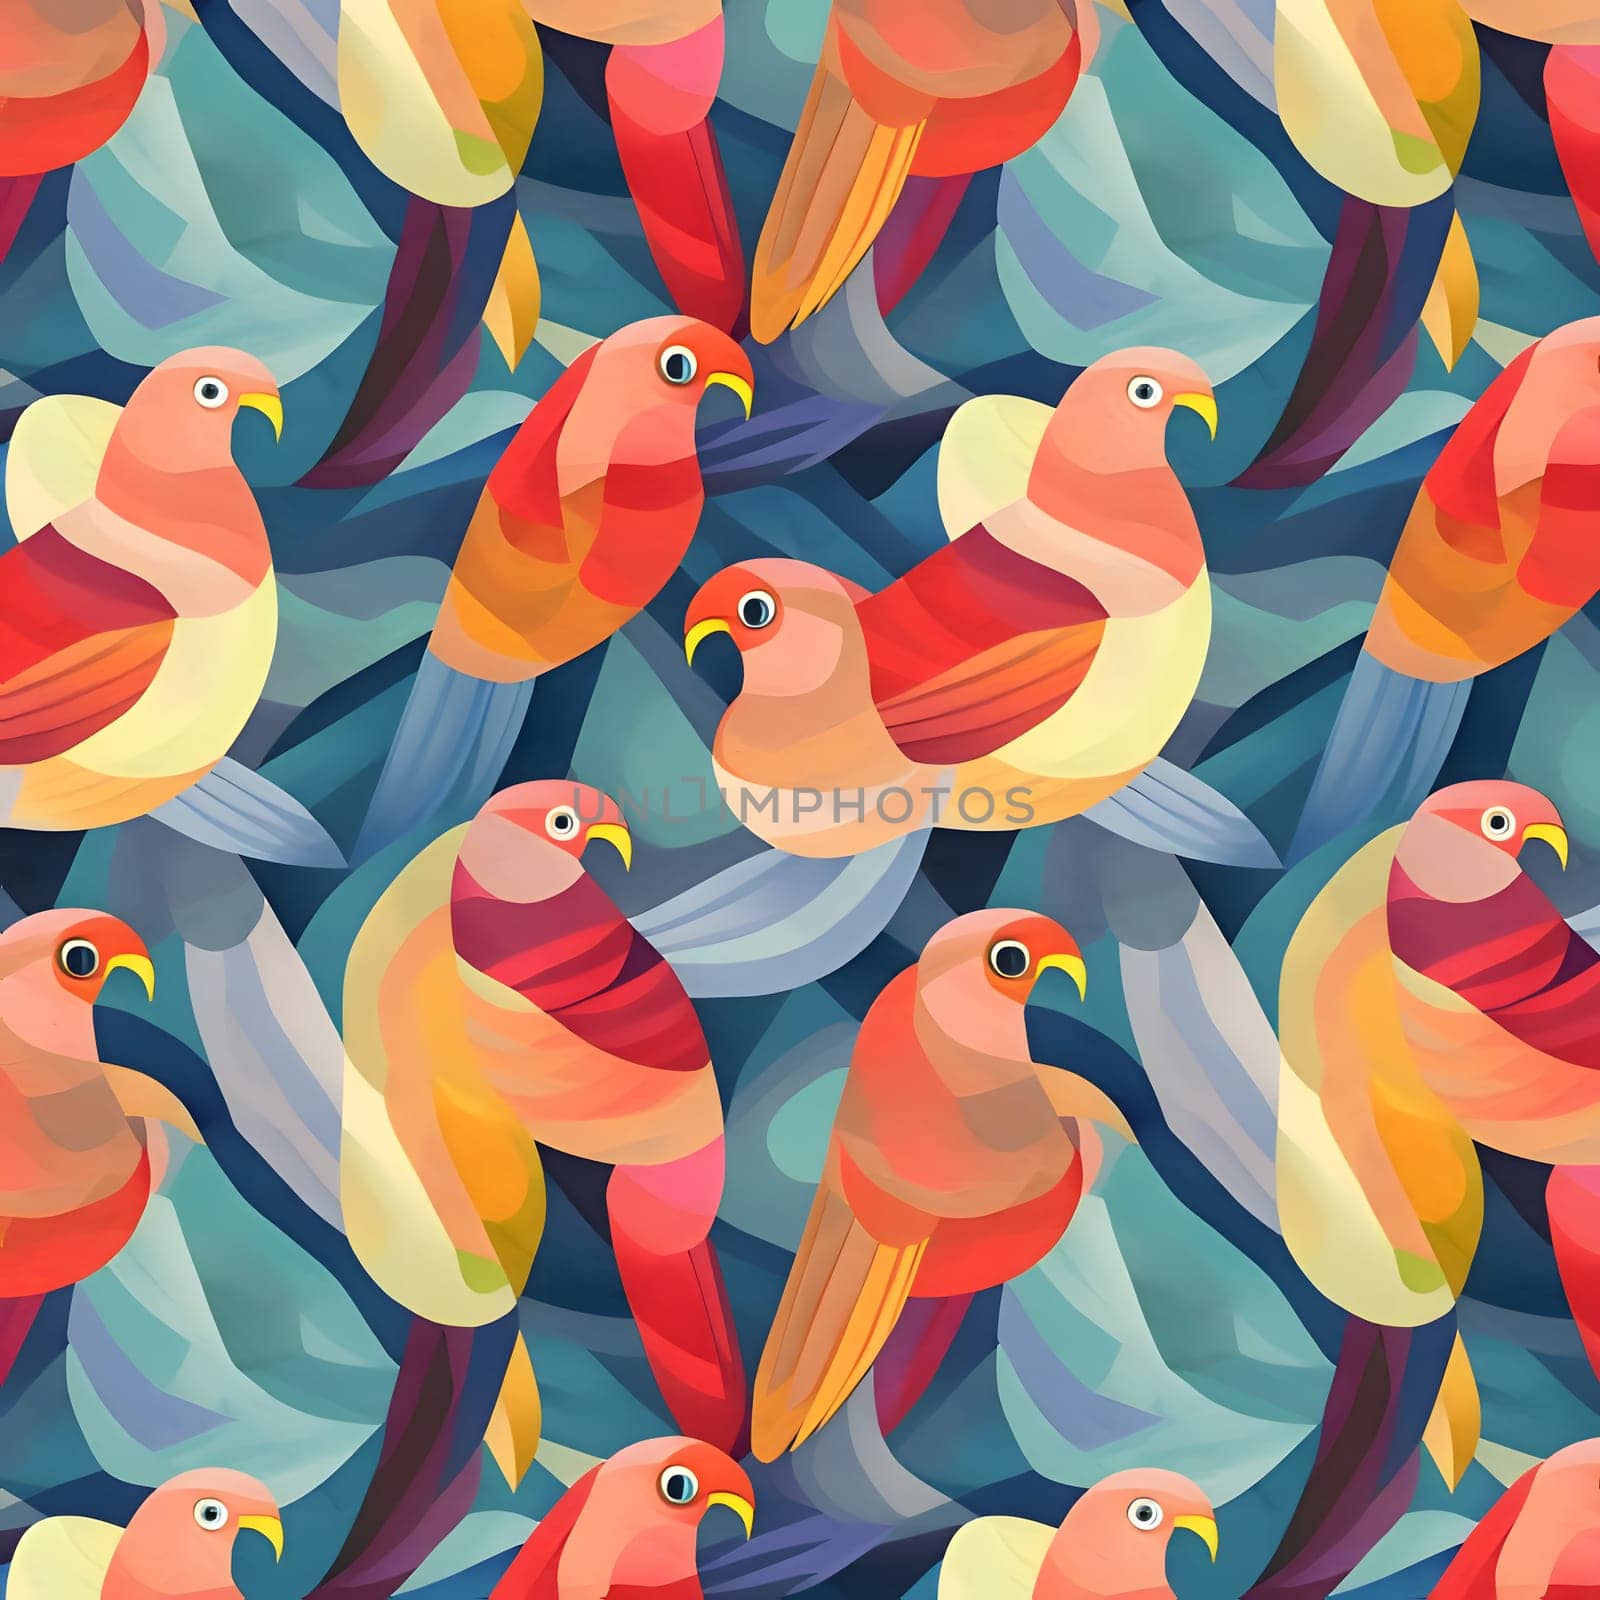 Patterns and banners backgrounds: Seamless pattern with parrots on abstract background. Vector illustration.